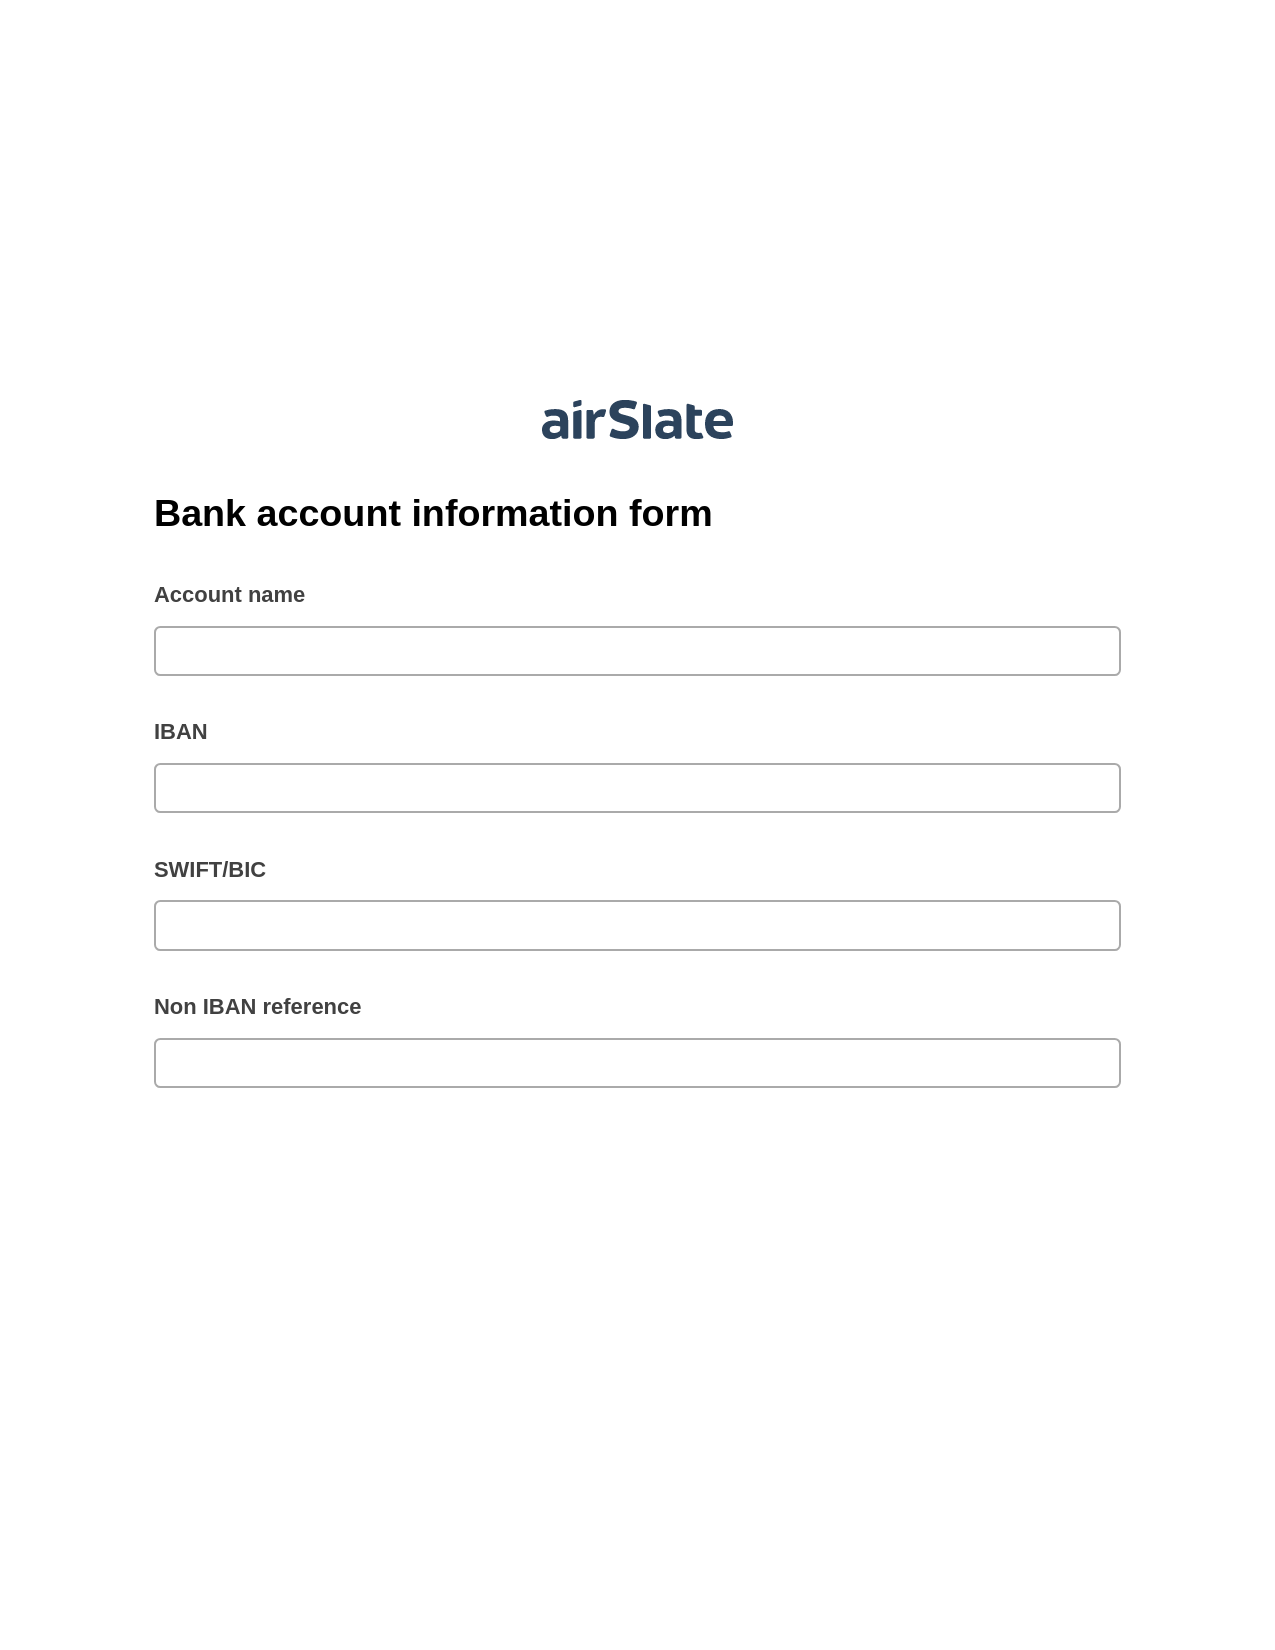 Bank account information form Pre-fill from NetSuite Records Bot, Audit Trail Bot, Export to NetSuite Record Bot